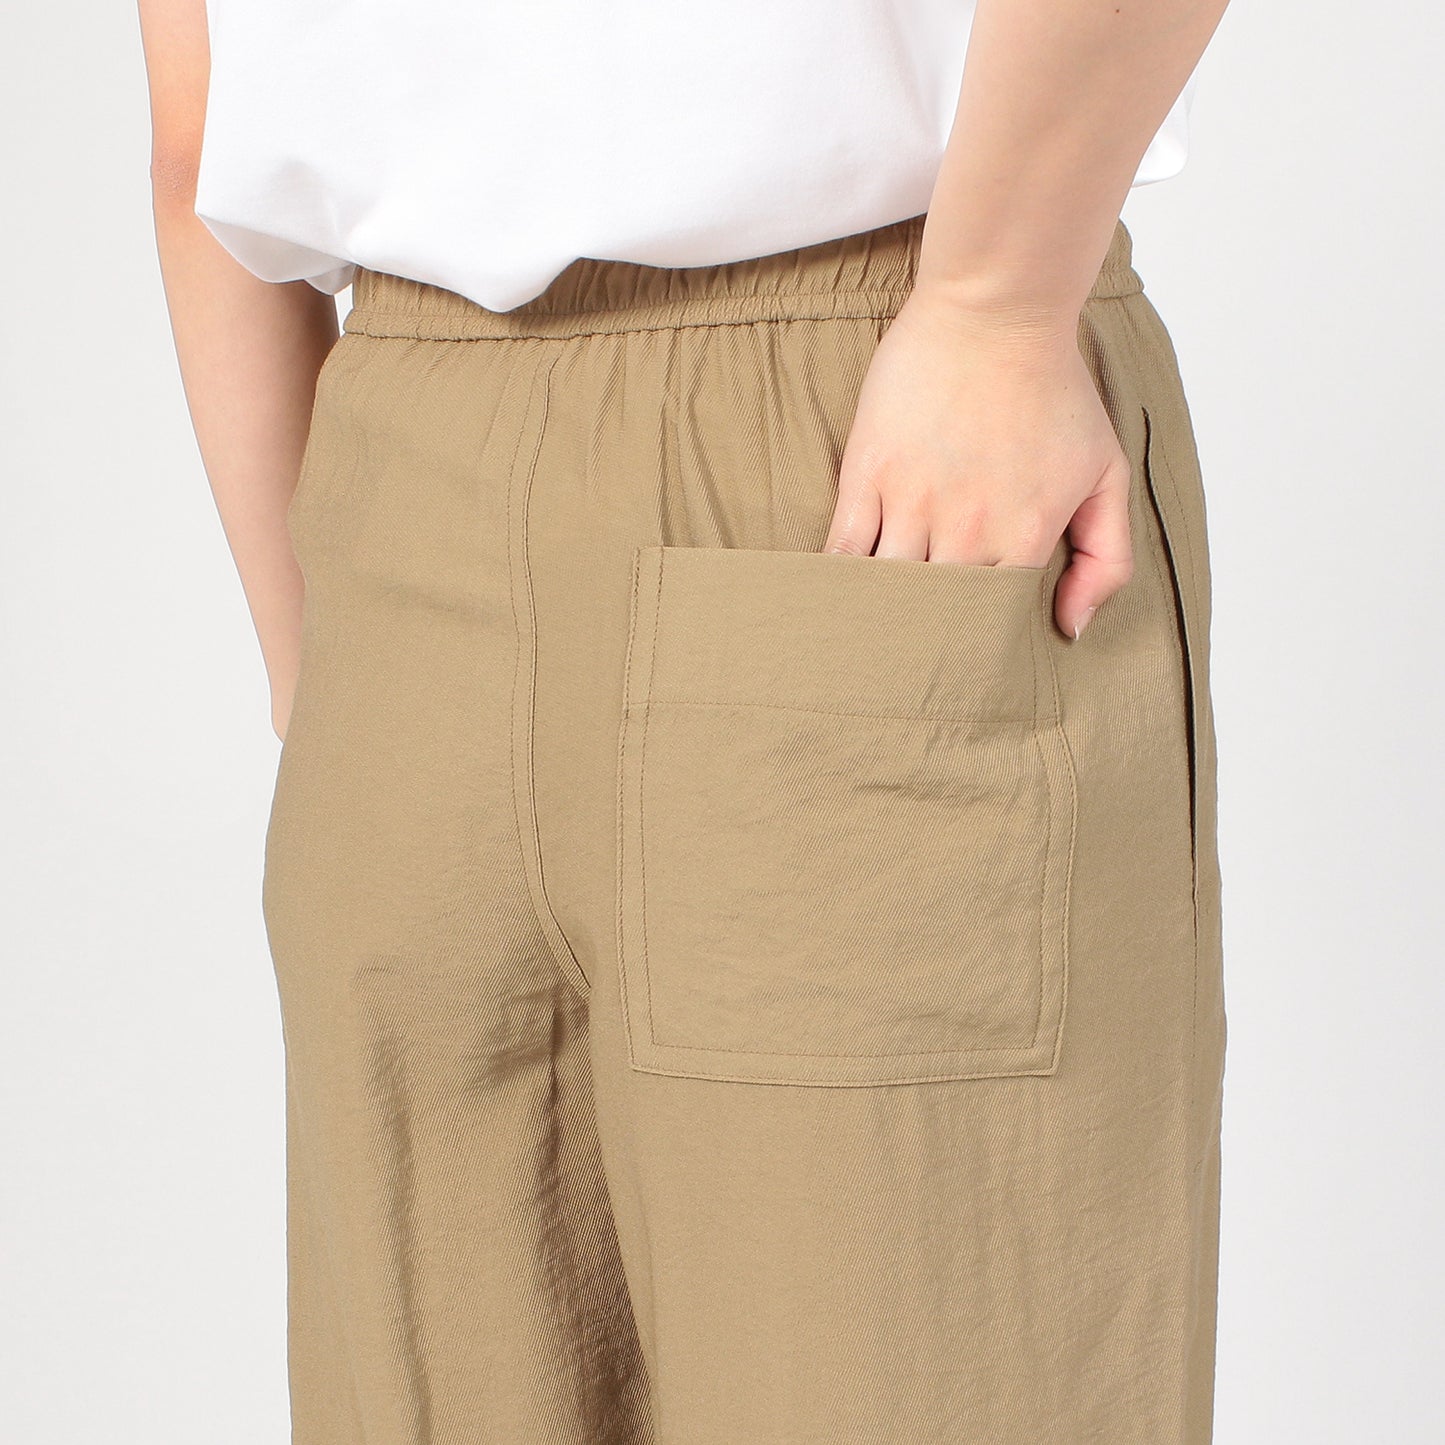 PASSIONE RELAX WIDE PANTS